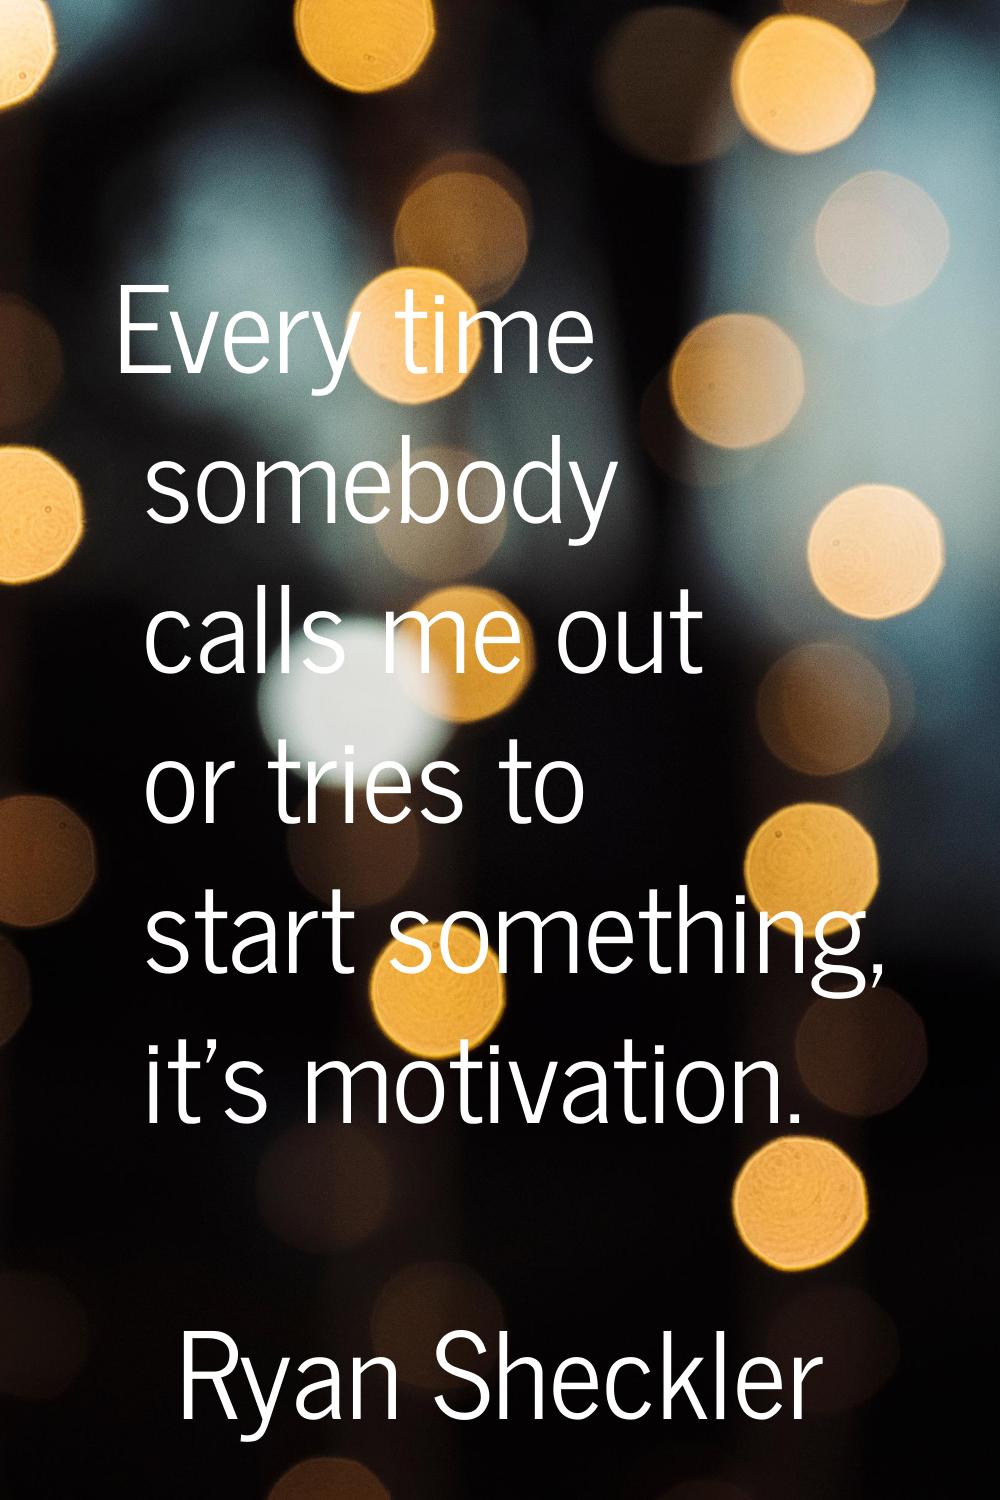 Every time somebody calls me out or tries to start something, it's motivation.